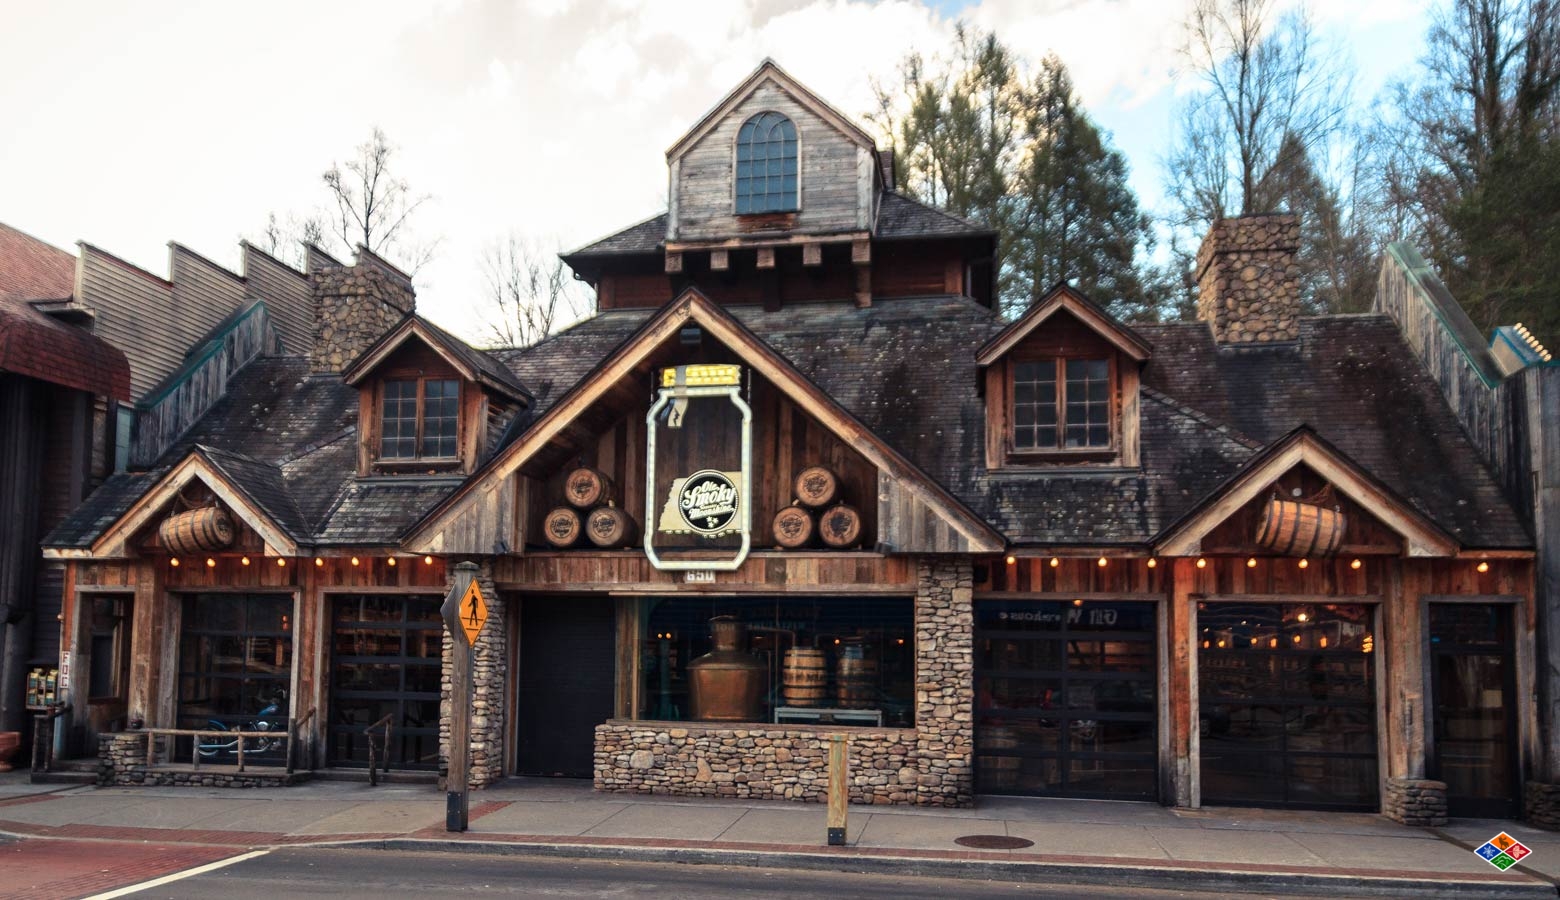 The Ole Smoky Distillery is a fun place to listen to live music in Gatlinburg. 